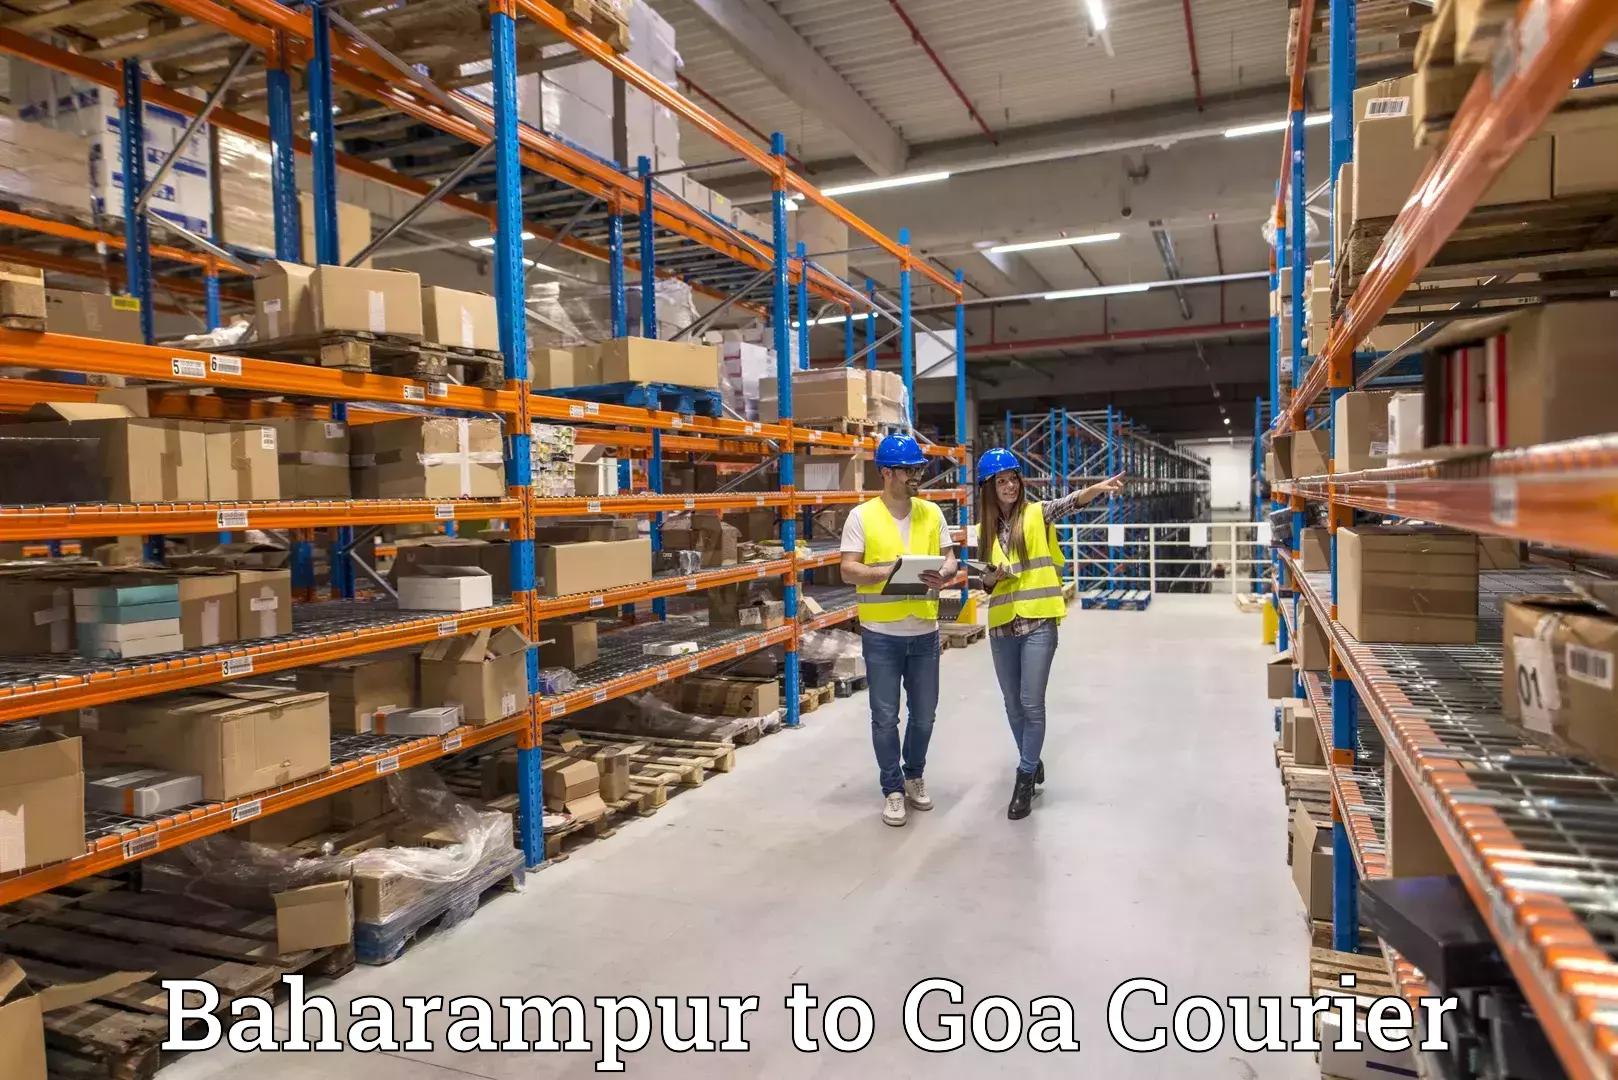 Express delivery network Baharampur to IIT Goa